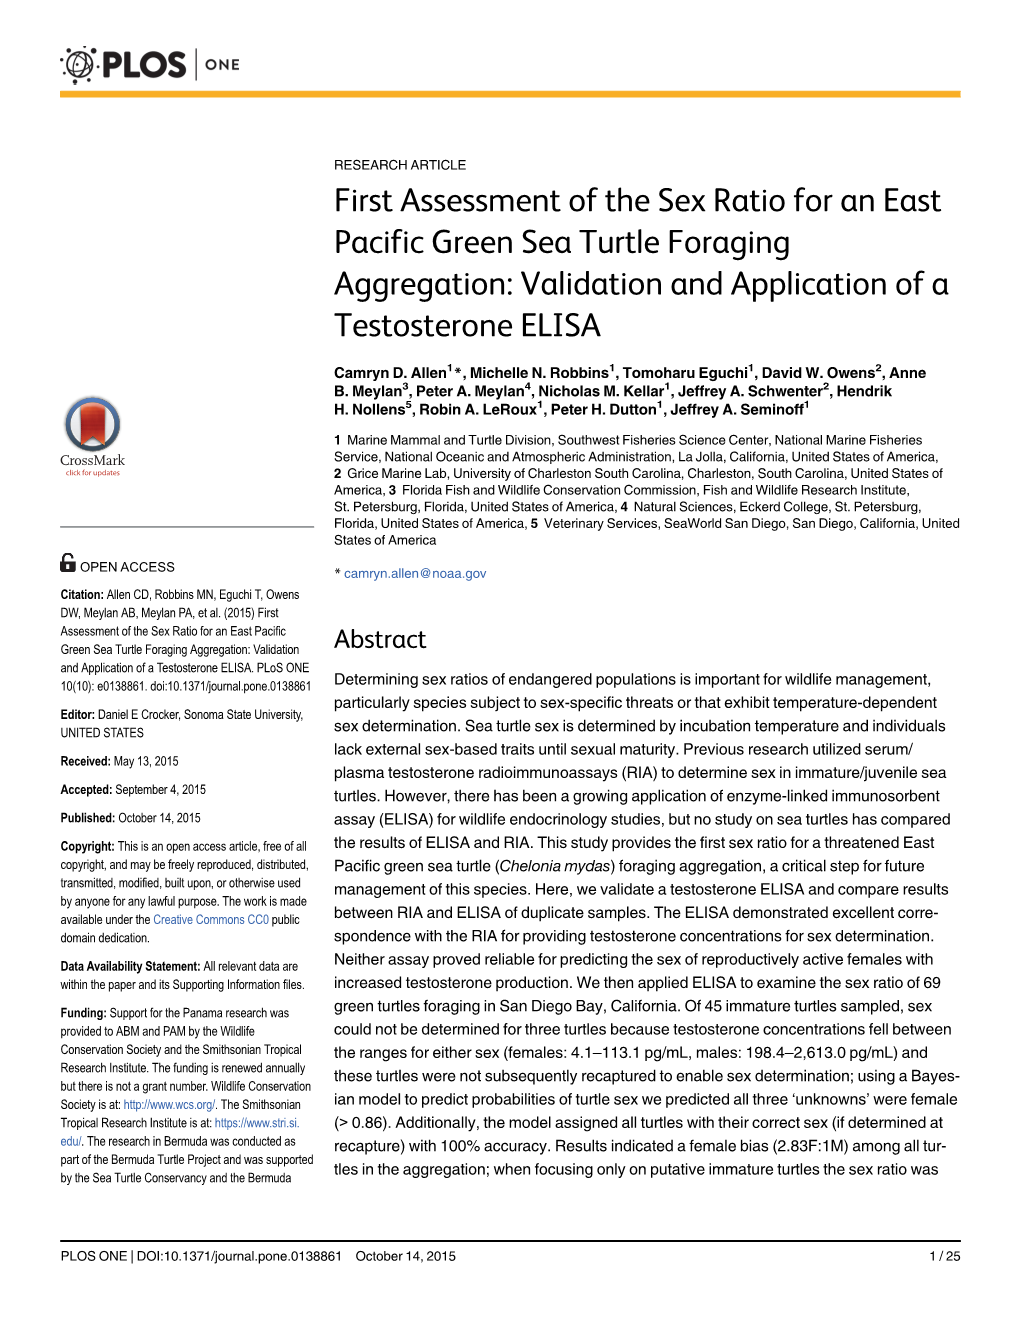 First Assessment of the Sex Ratio for an East Pacific Green Sea Turtle Foraging Aggregation: Validation and Application of a Testosterone ELISA